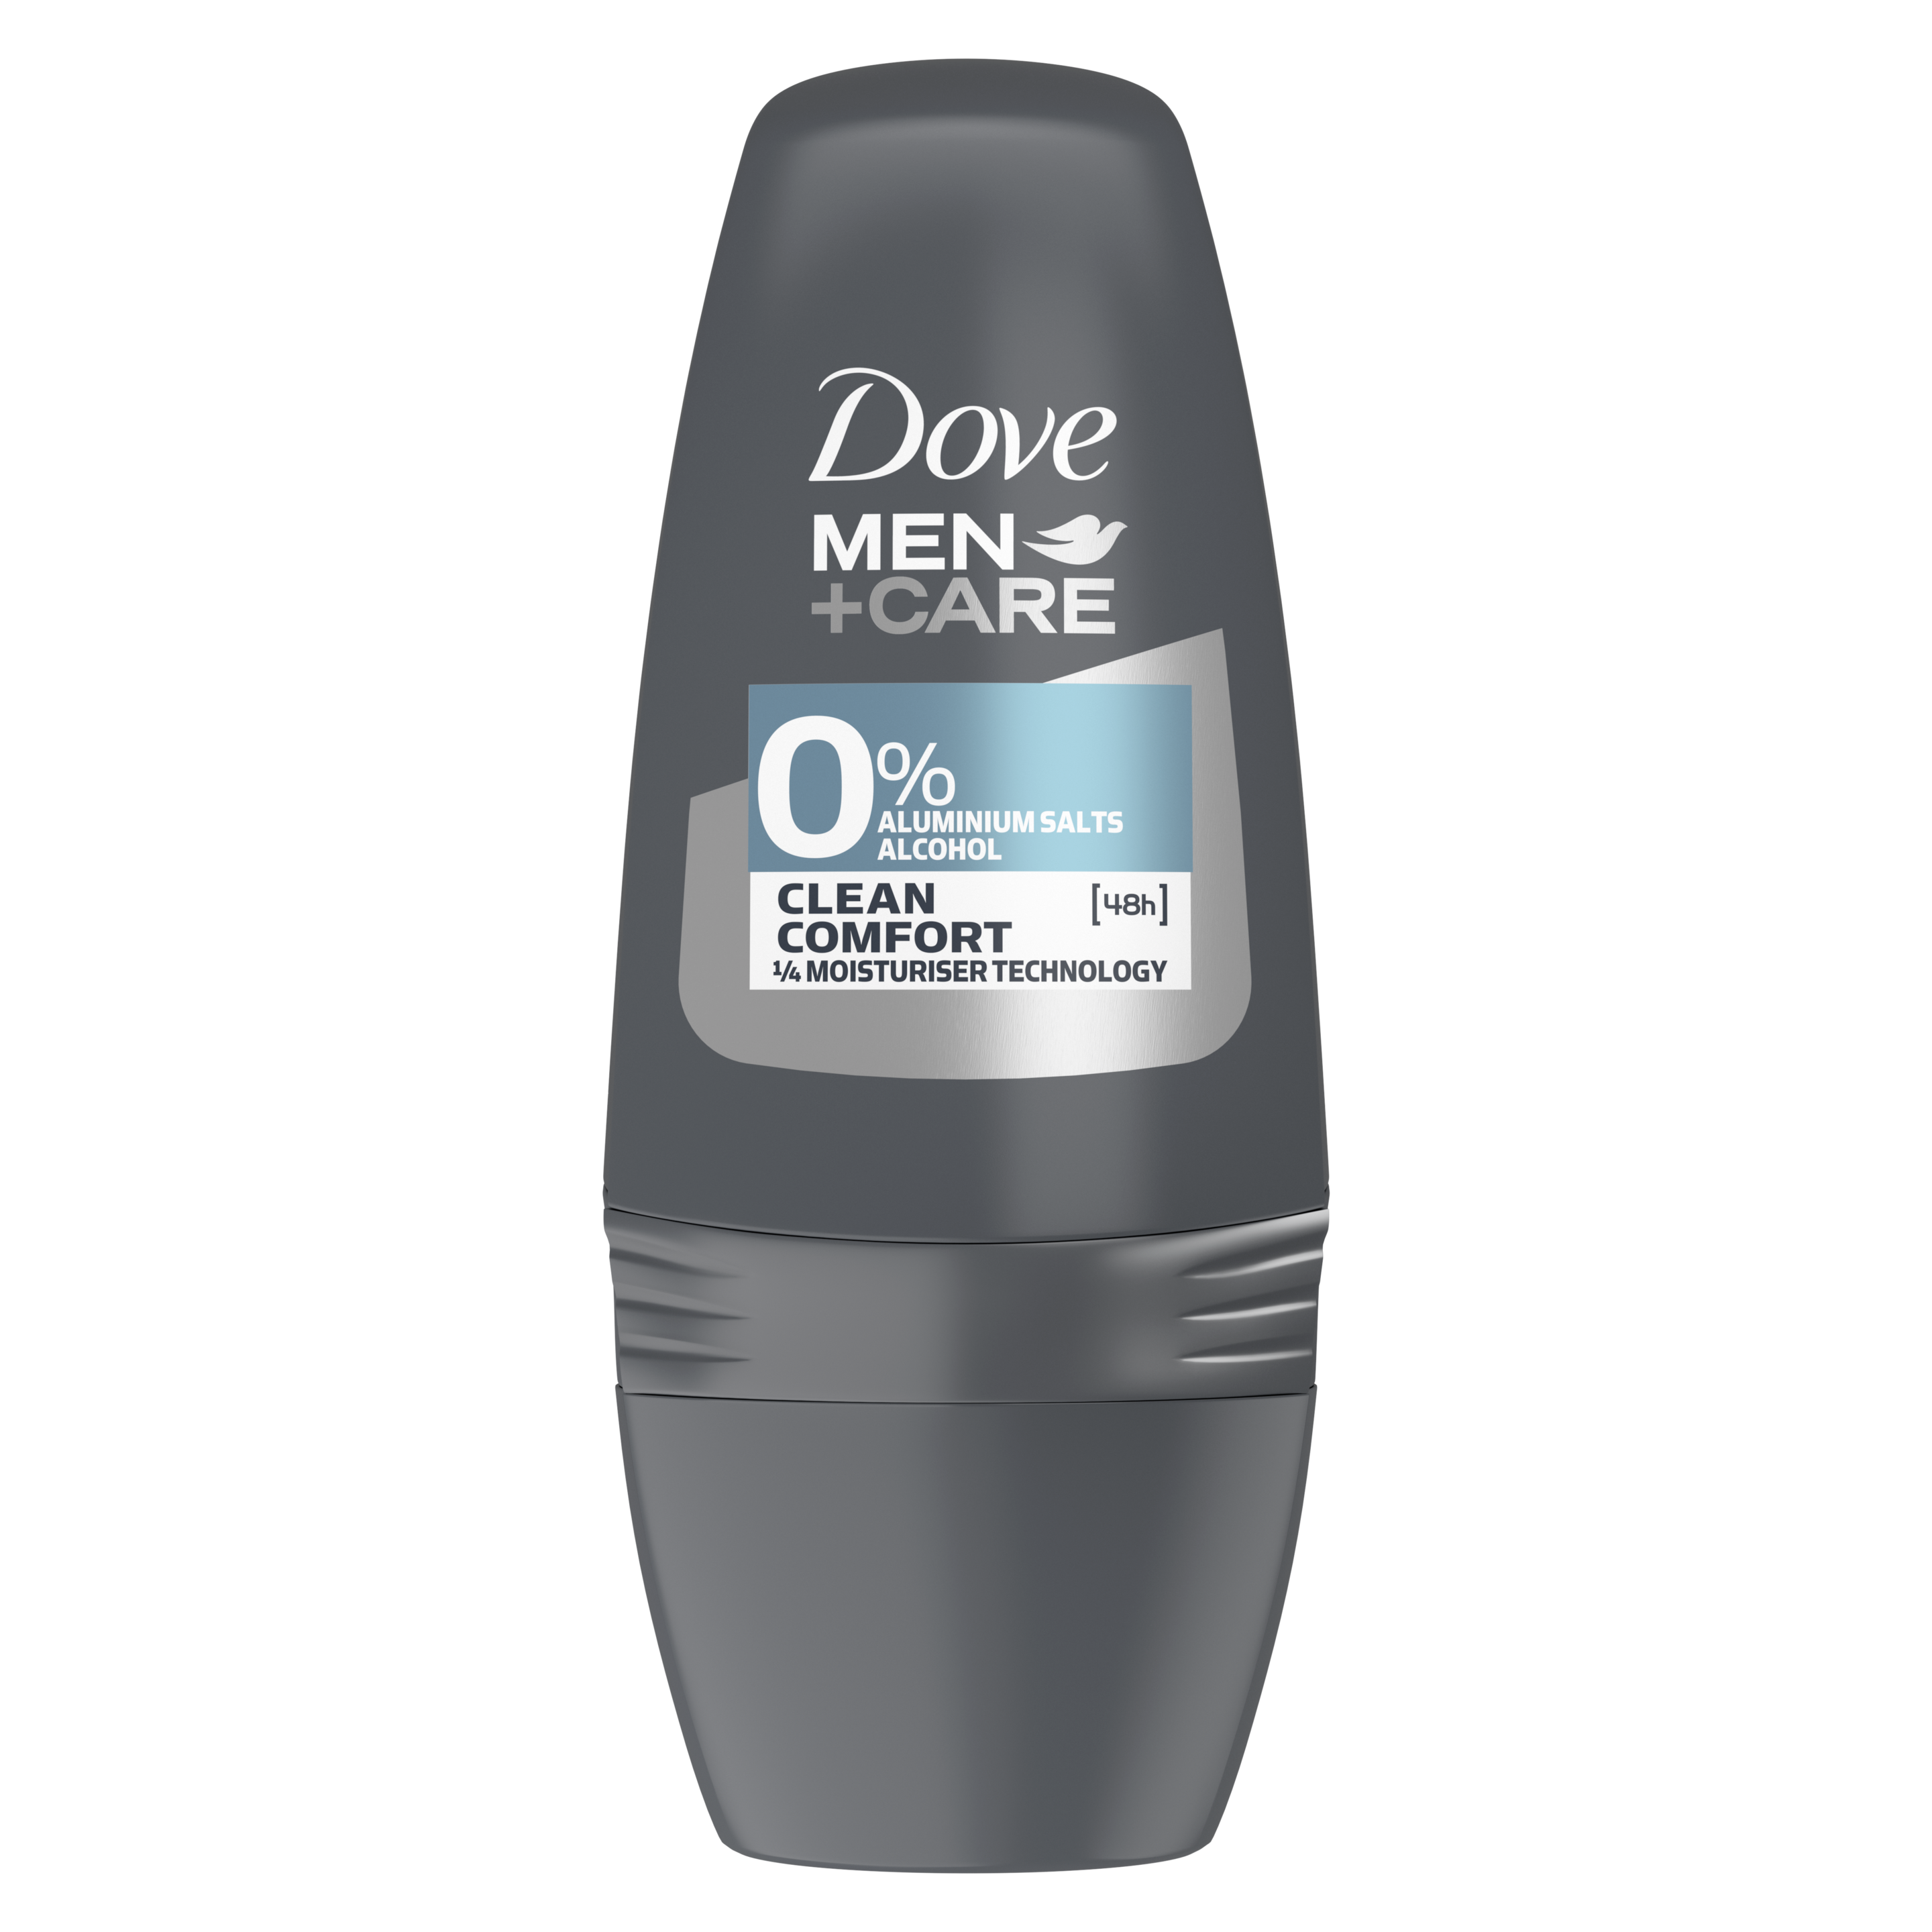 Dove Men+Care Clean Comfort Gift Set for Men, Fresh Face and Body Wash,  Deodorant Stick & Shower Tool, 3 Count 